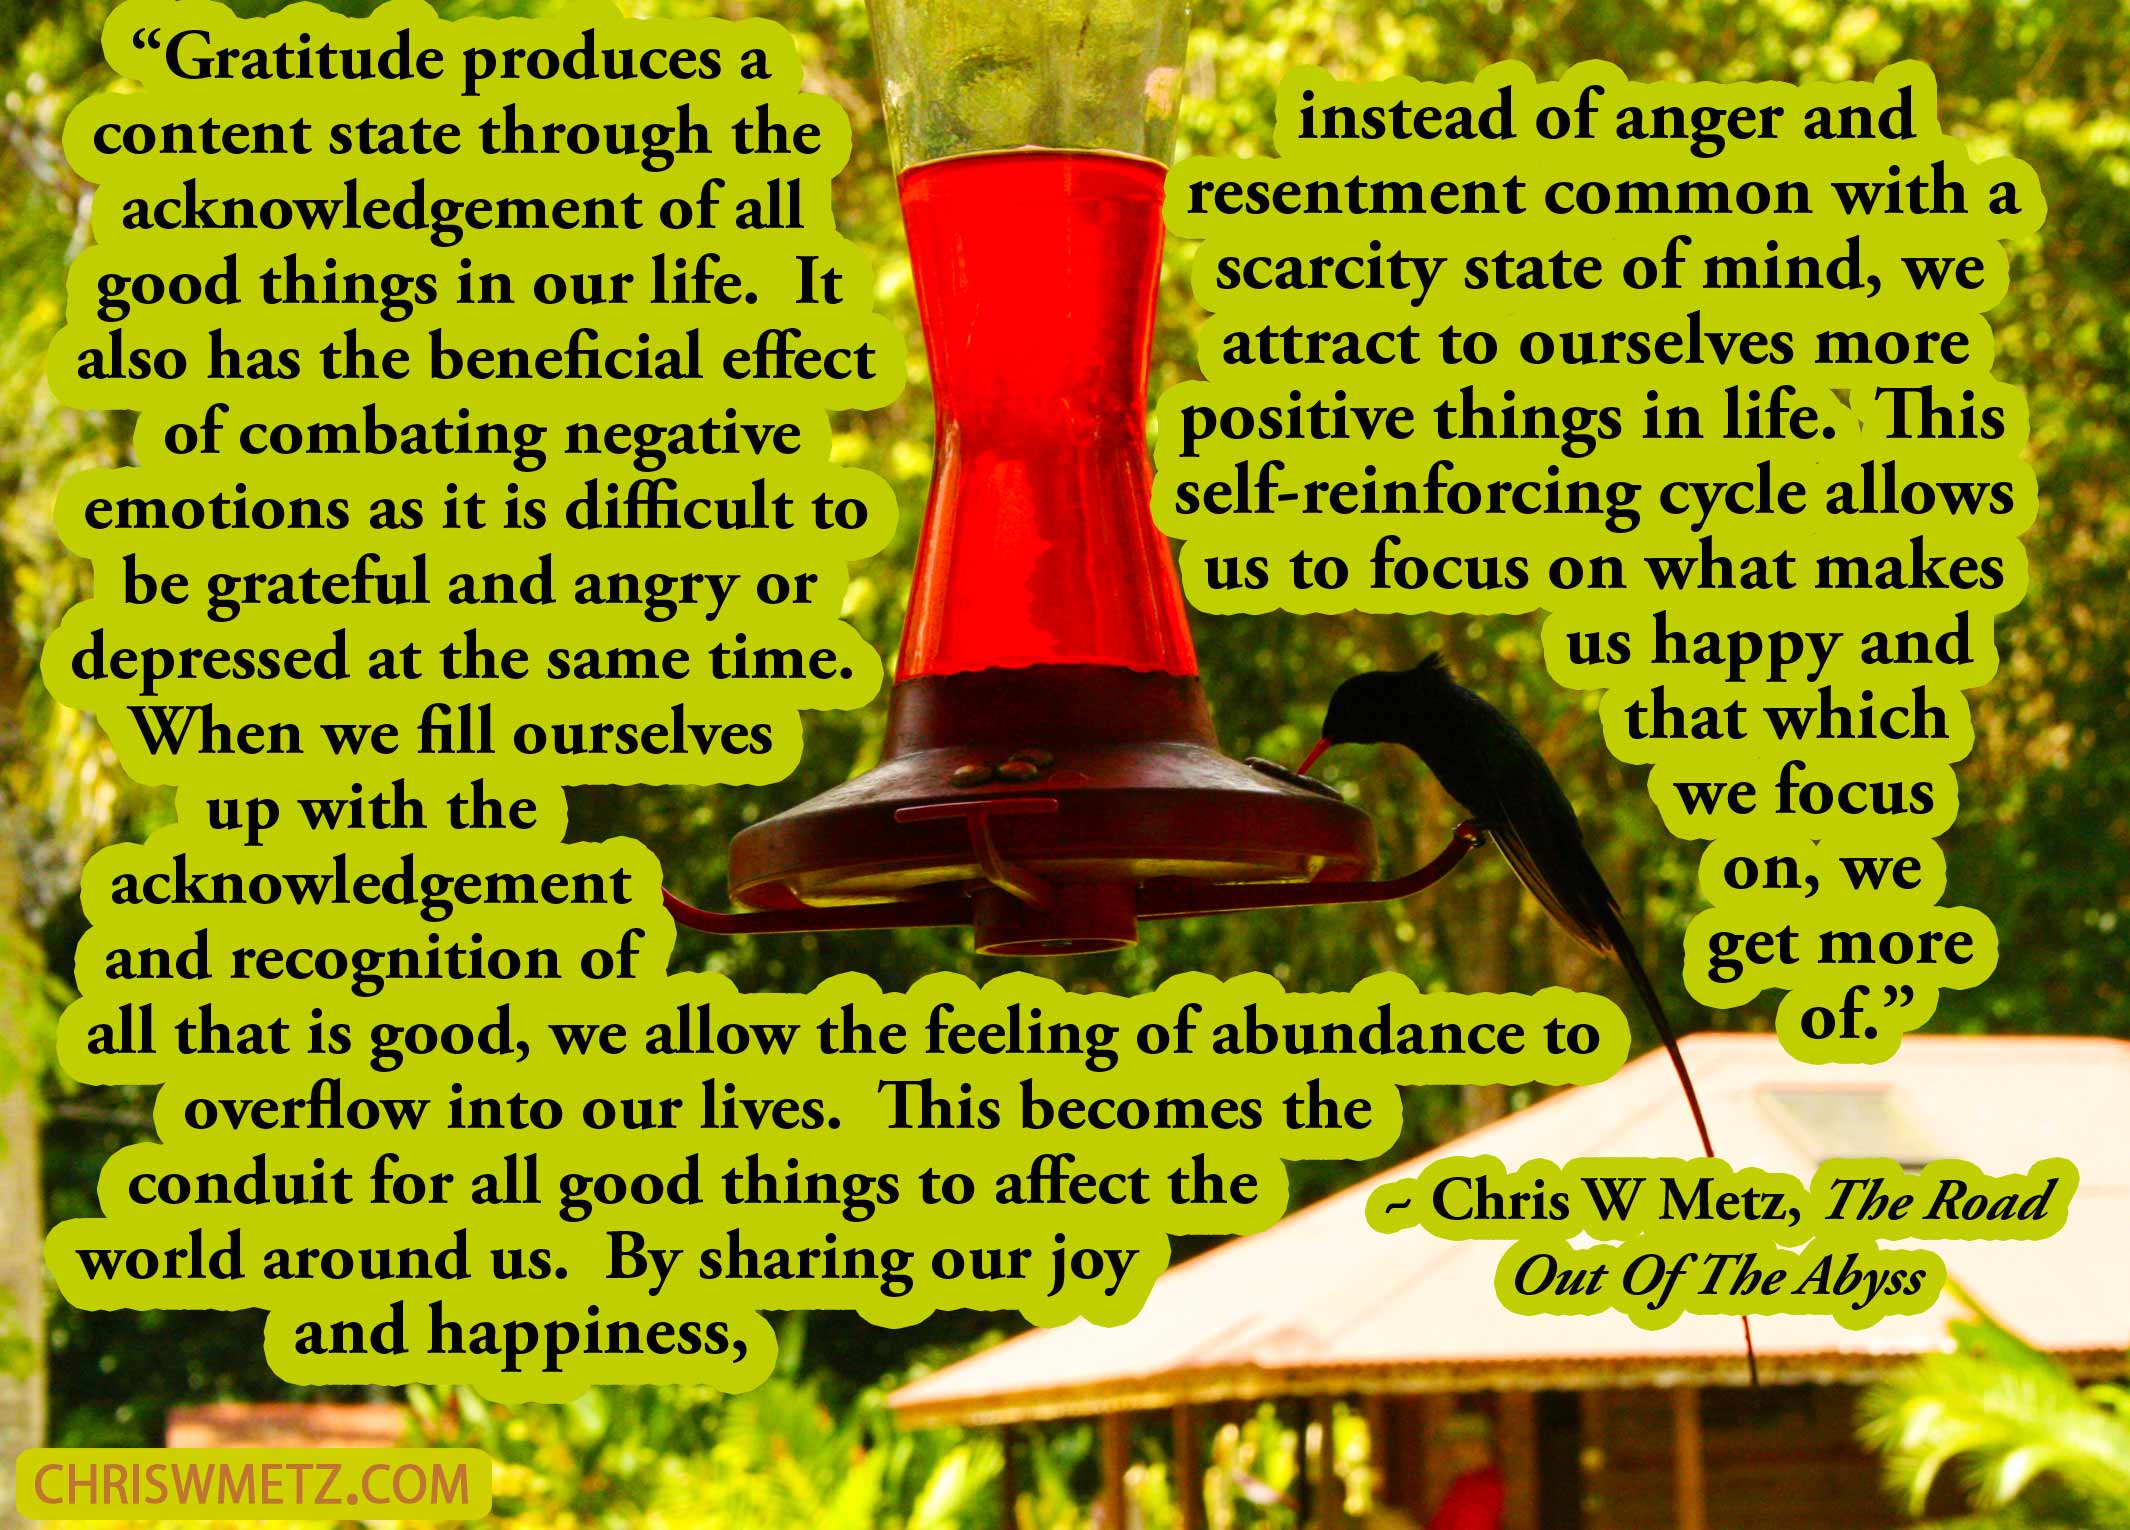 Gratitude Quote 3 Chris W Metz - The Road Out Of The Abyss